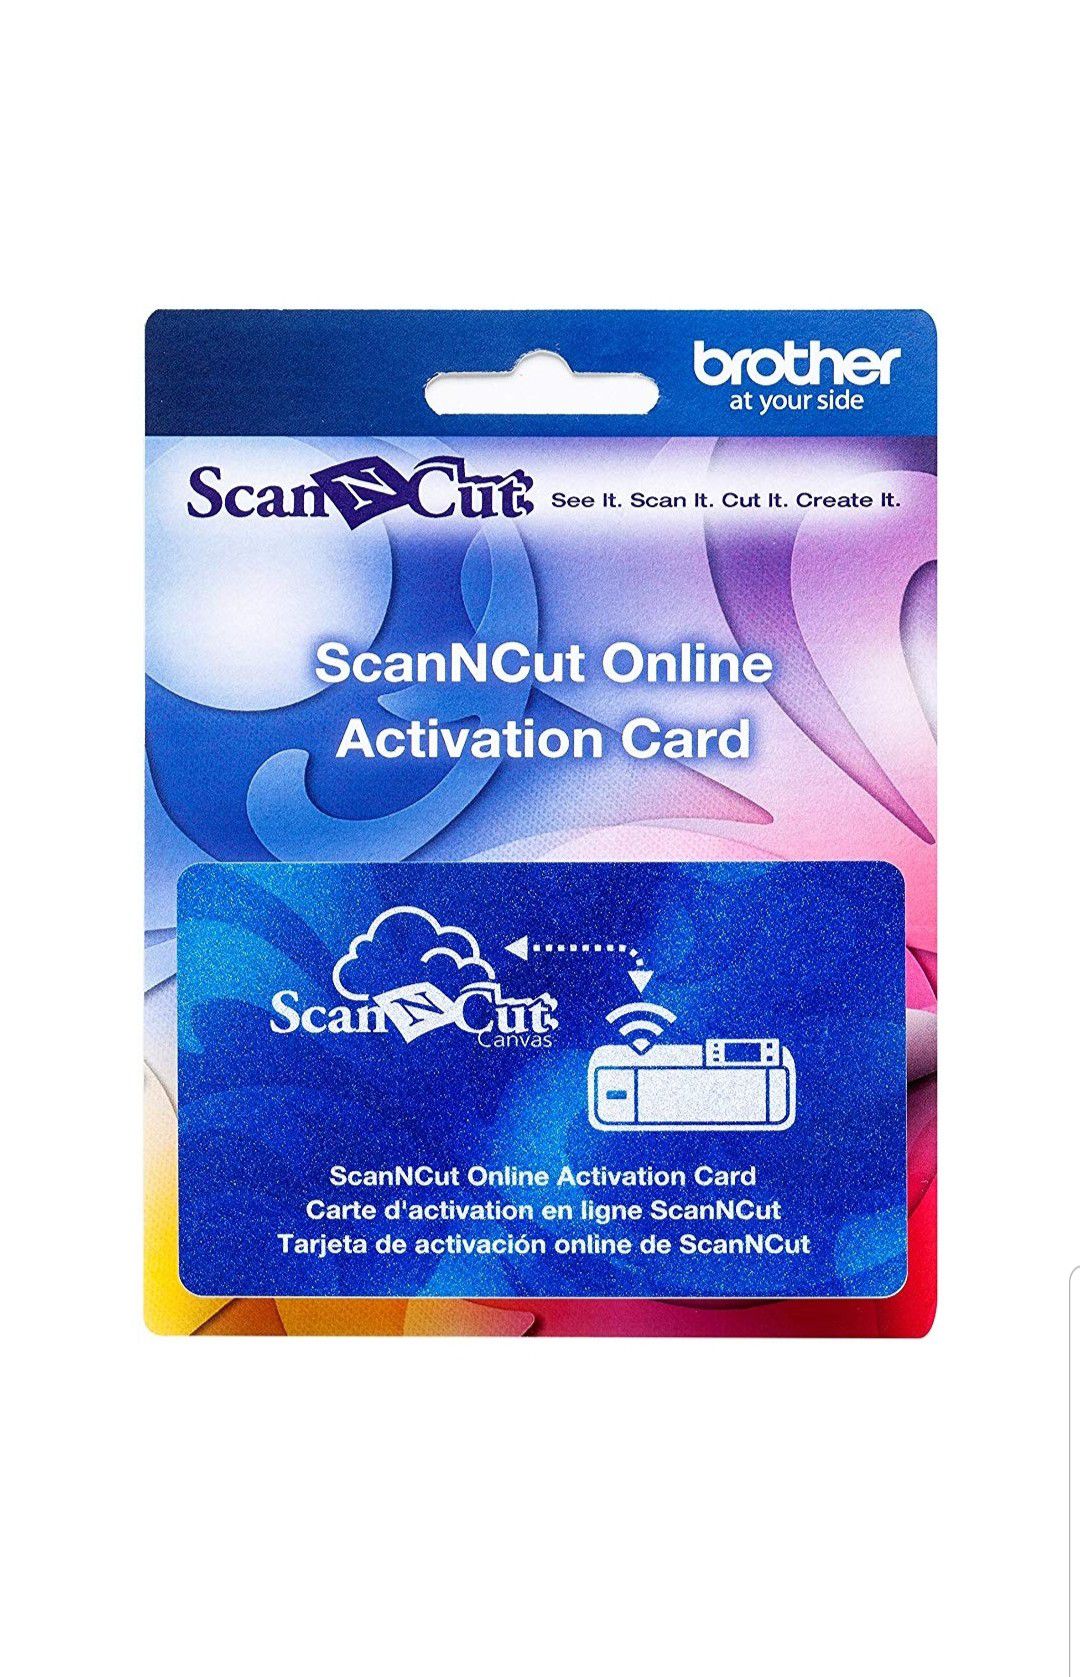 Scan N Cut activation card